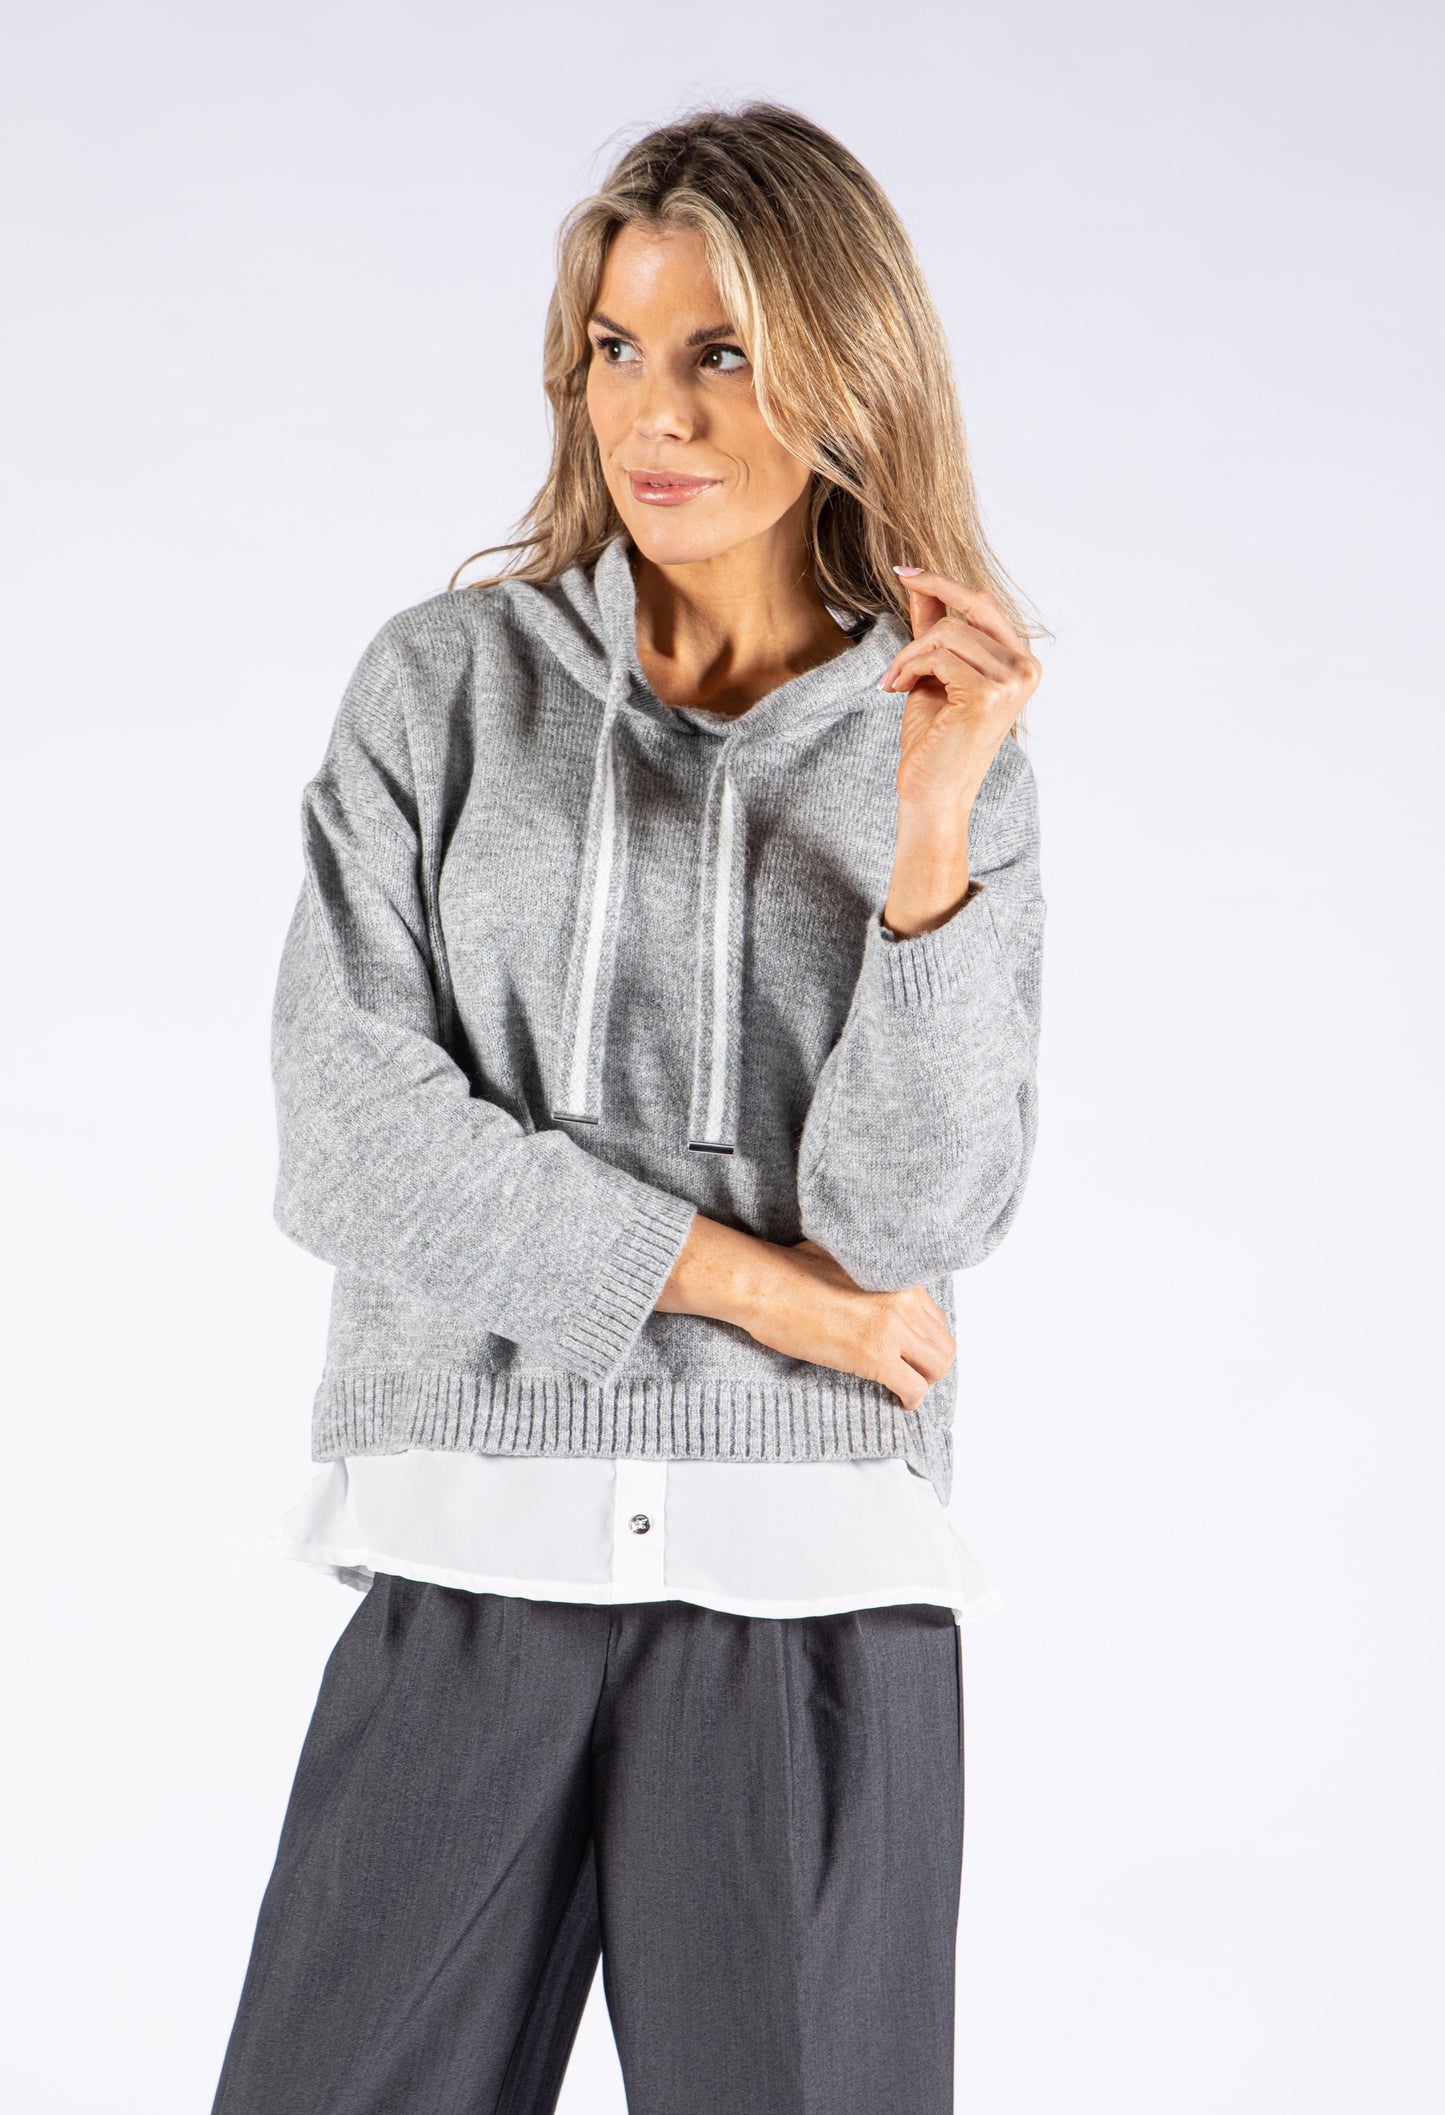 Layered Look Knit Pullover